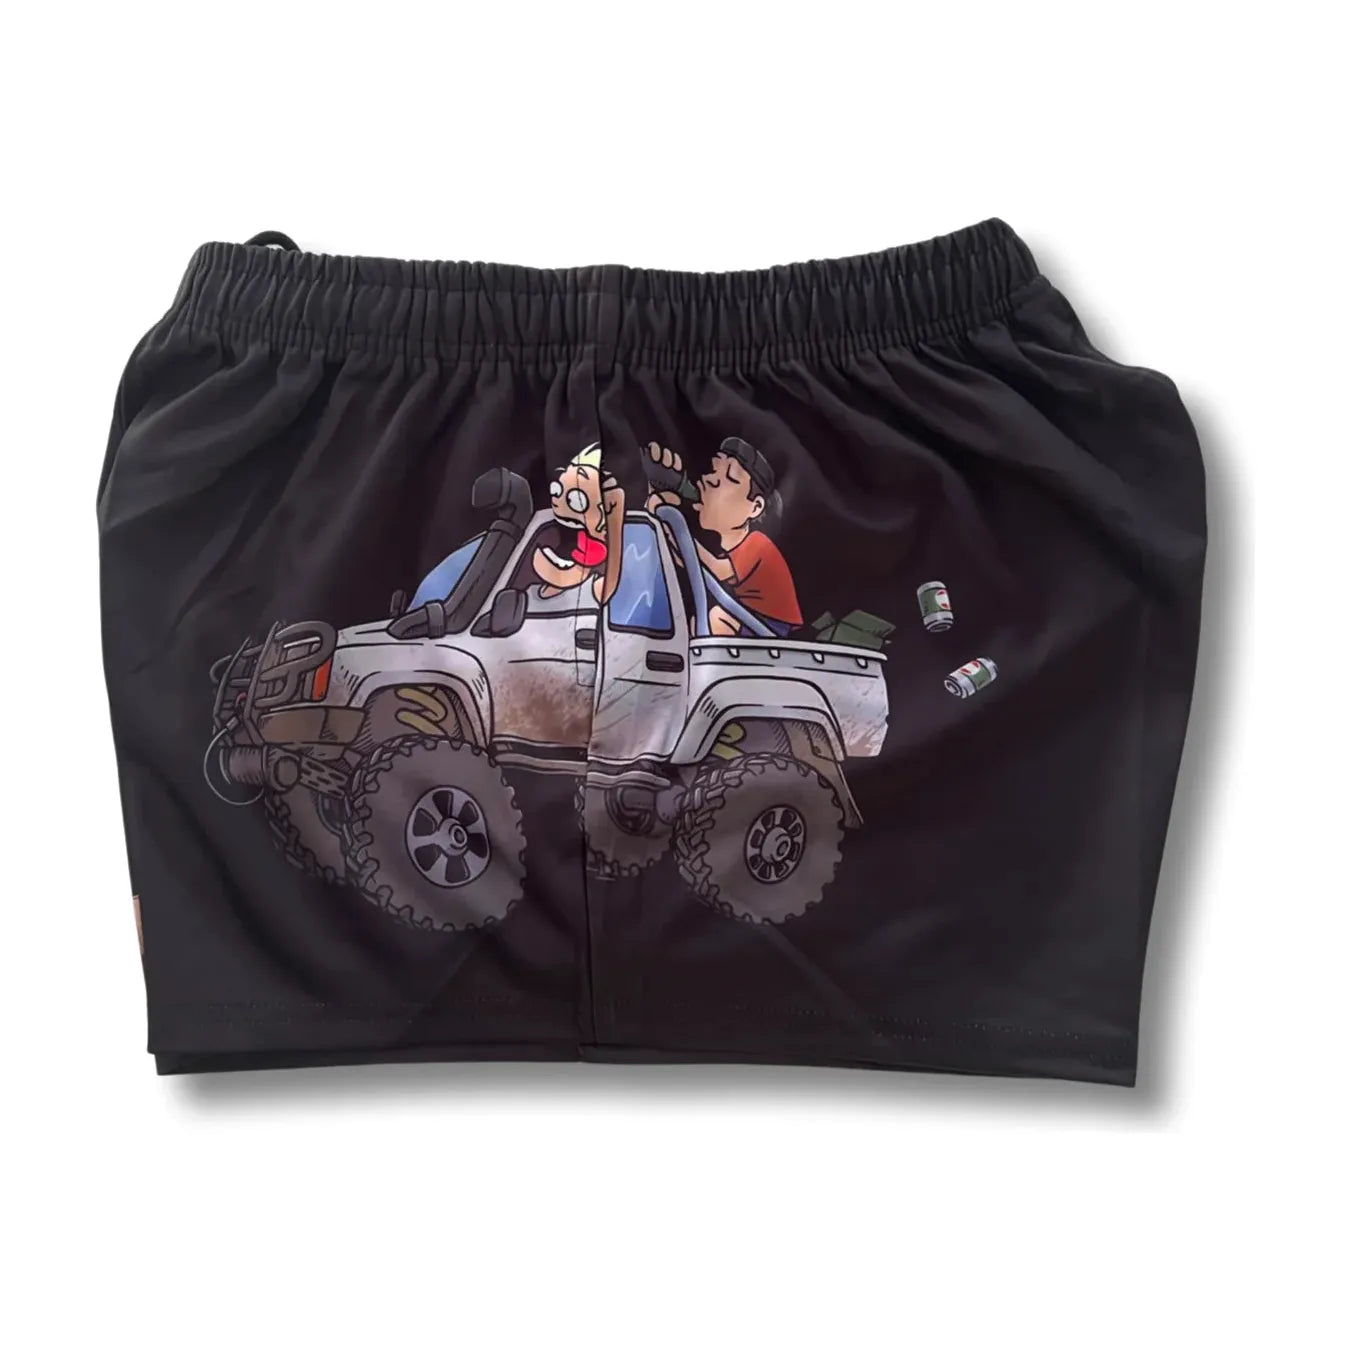 Unisex Aussie Footy Shorts Unbreakable Hilux with Pockets